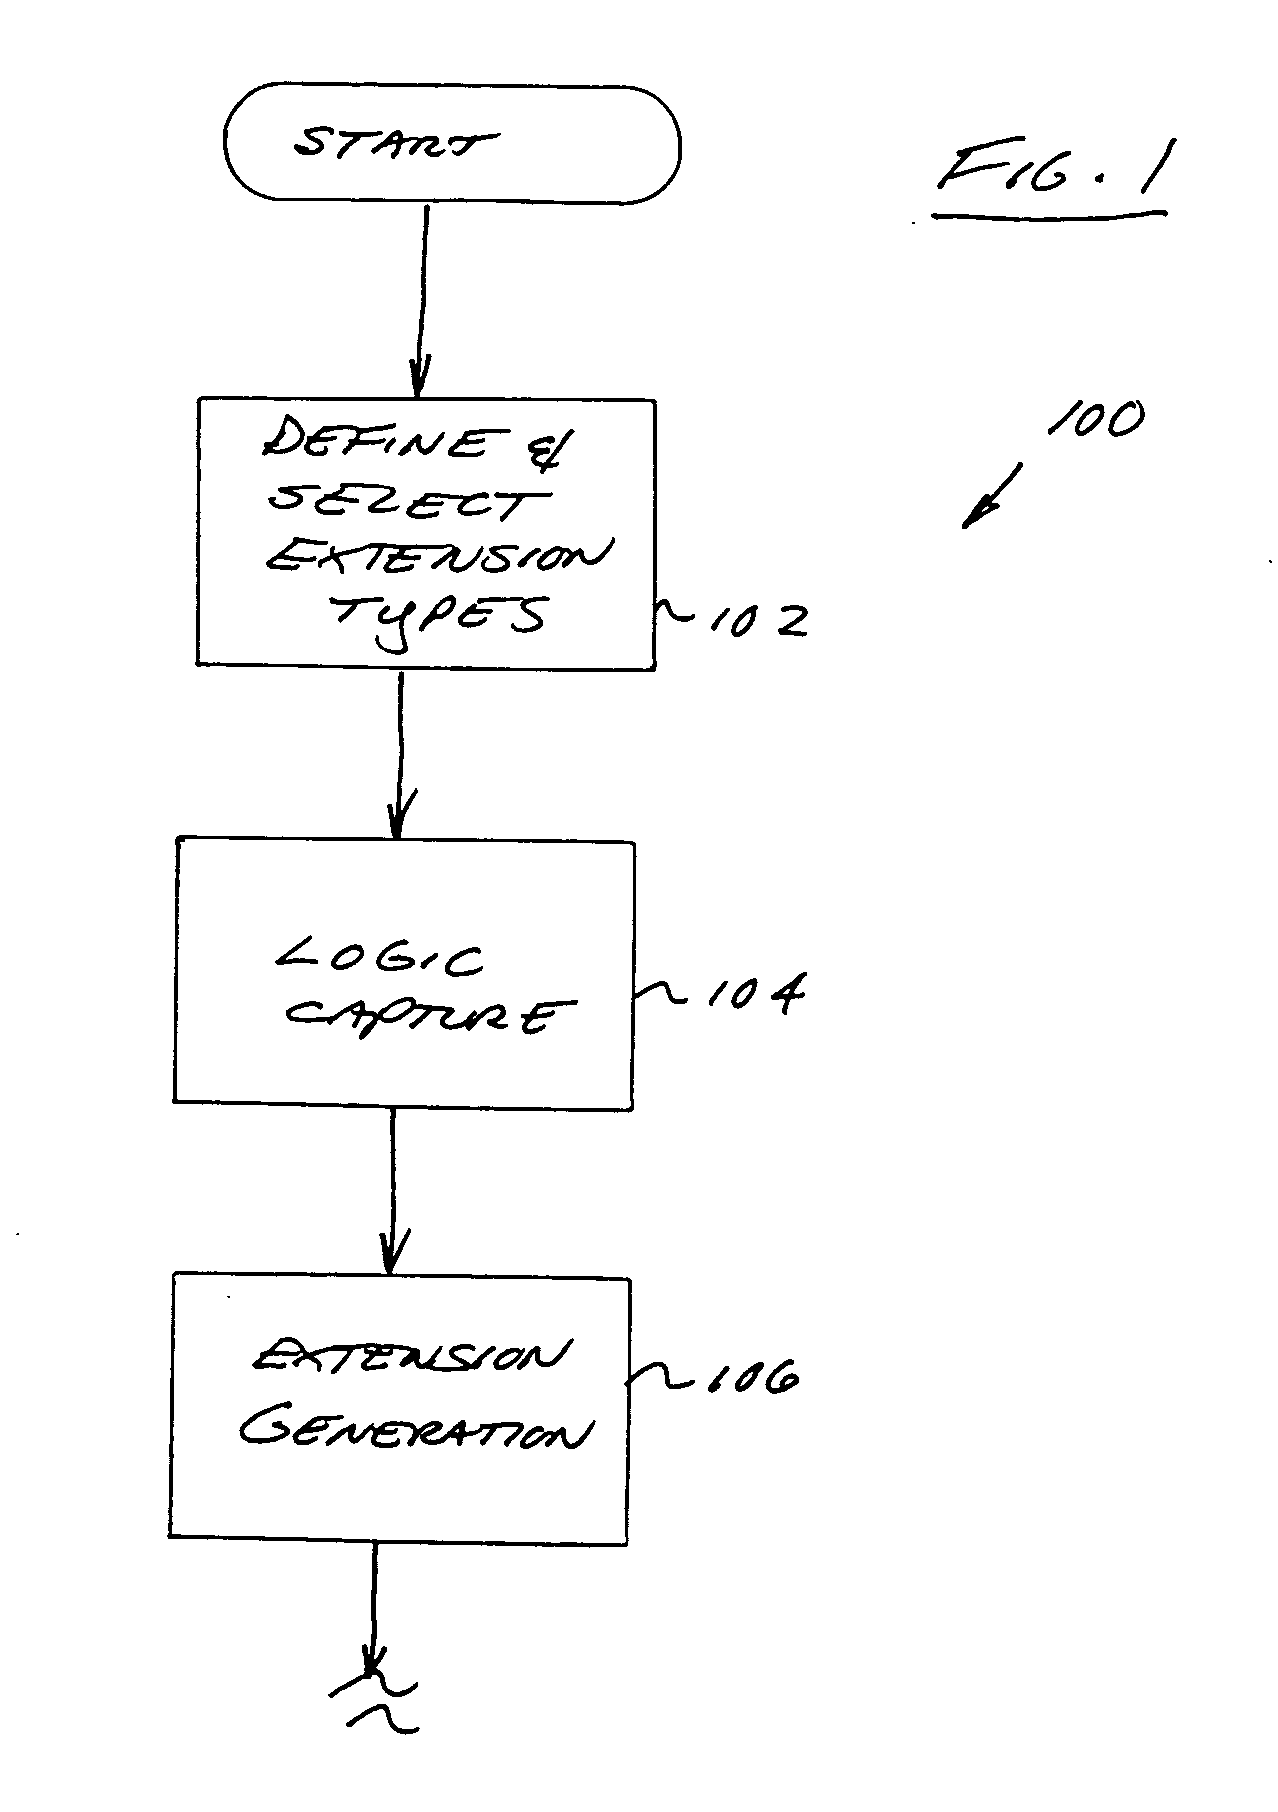 Computerized extension apparatus and methods